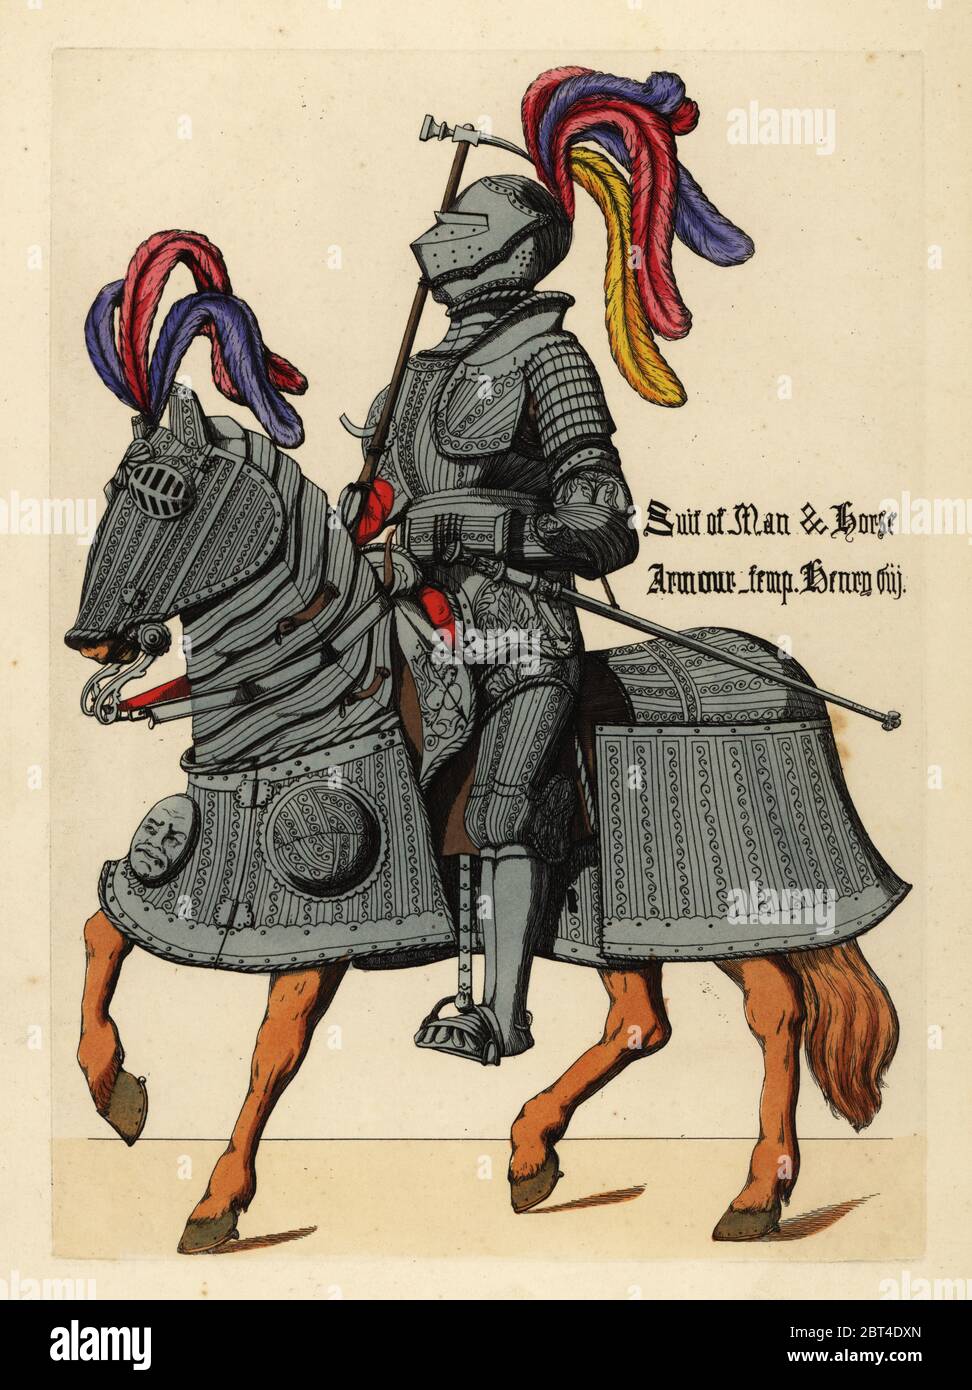 Suit of engraved plate armour and horse barding, reign of King Henry VIII,  16th century. Knight in suit of armour, bourgonet helmet decorated with  drooping plumes, pauldrons, passe garde, sollerets, with sword